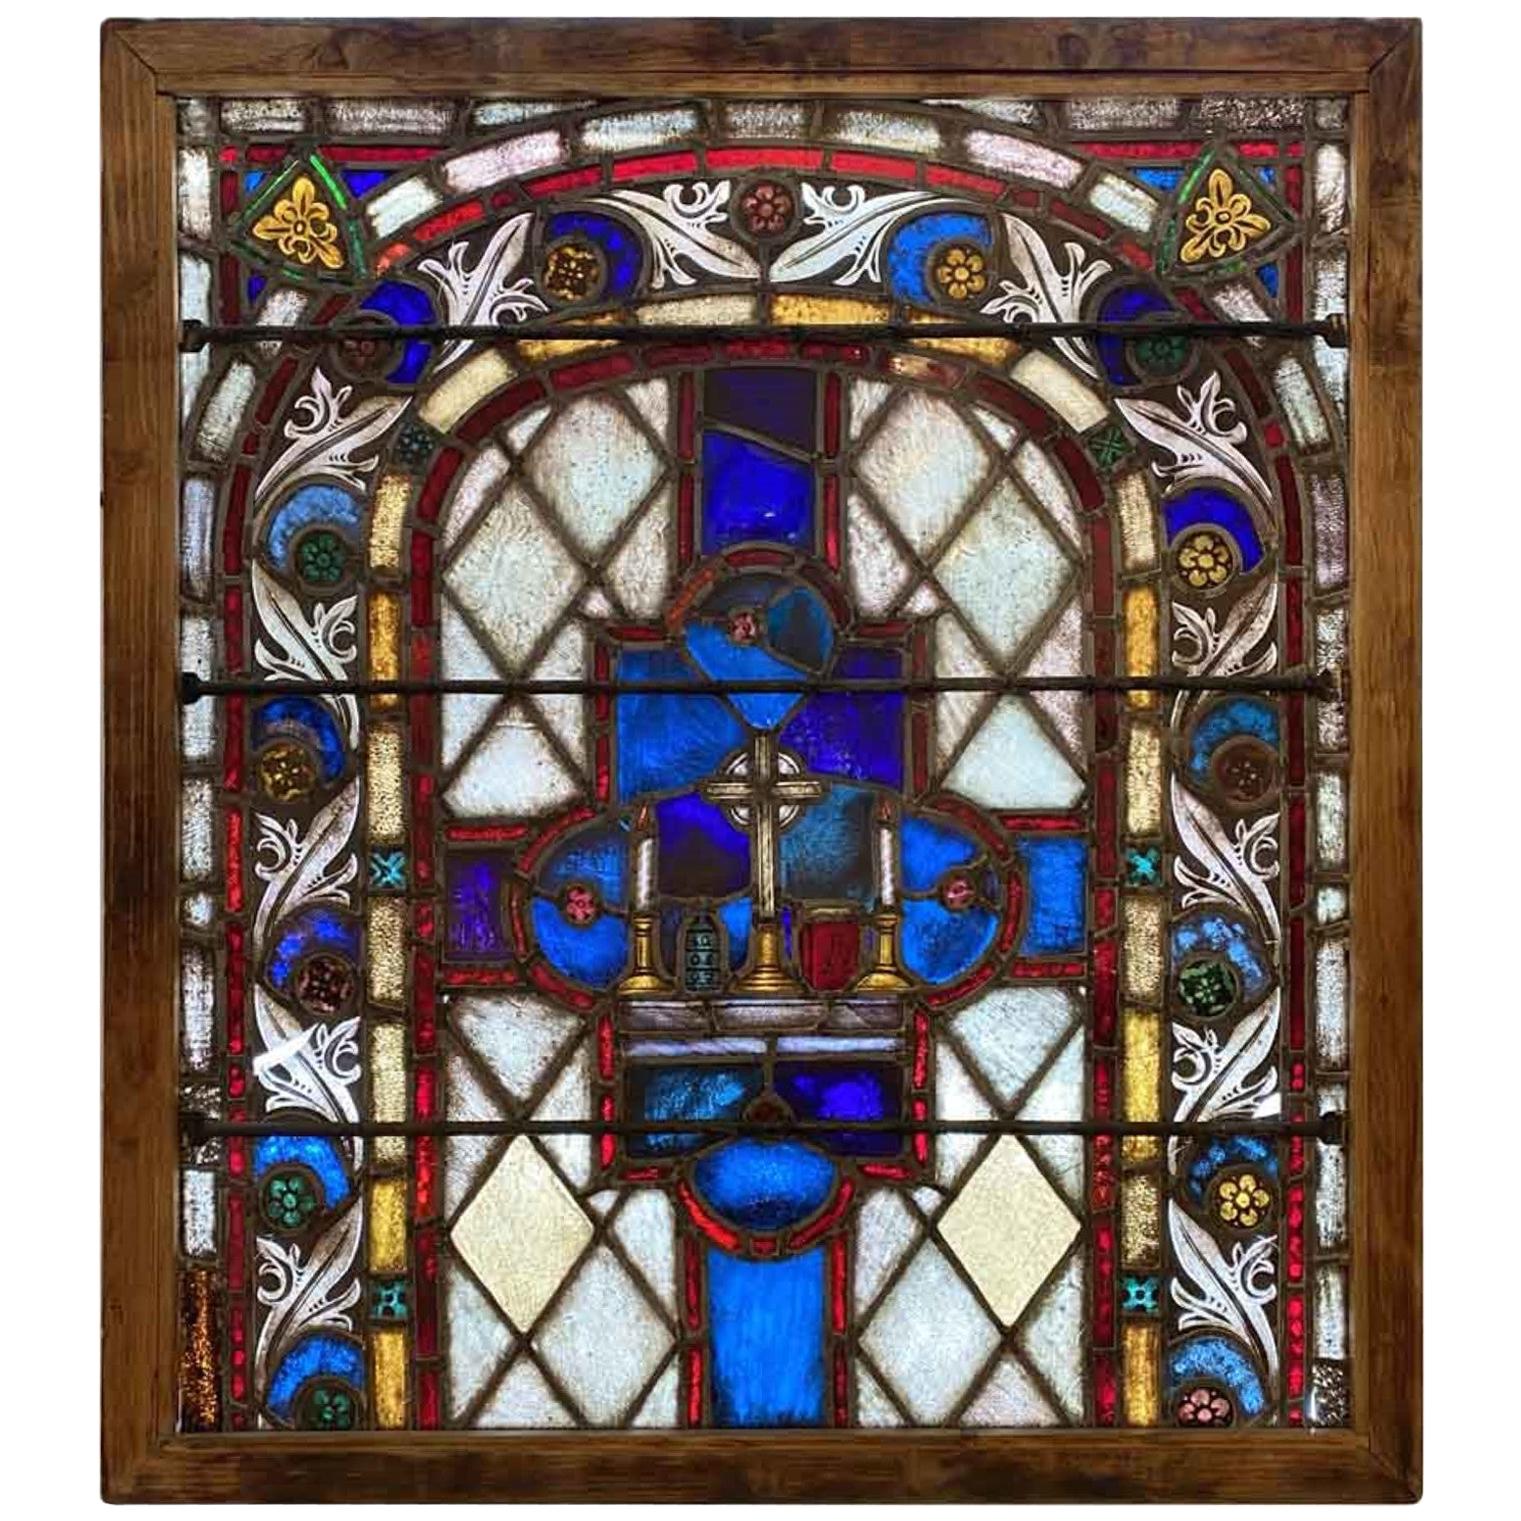 19th Century German Ecclesiastical Church Stained Glass Window